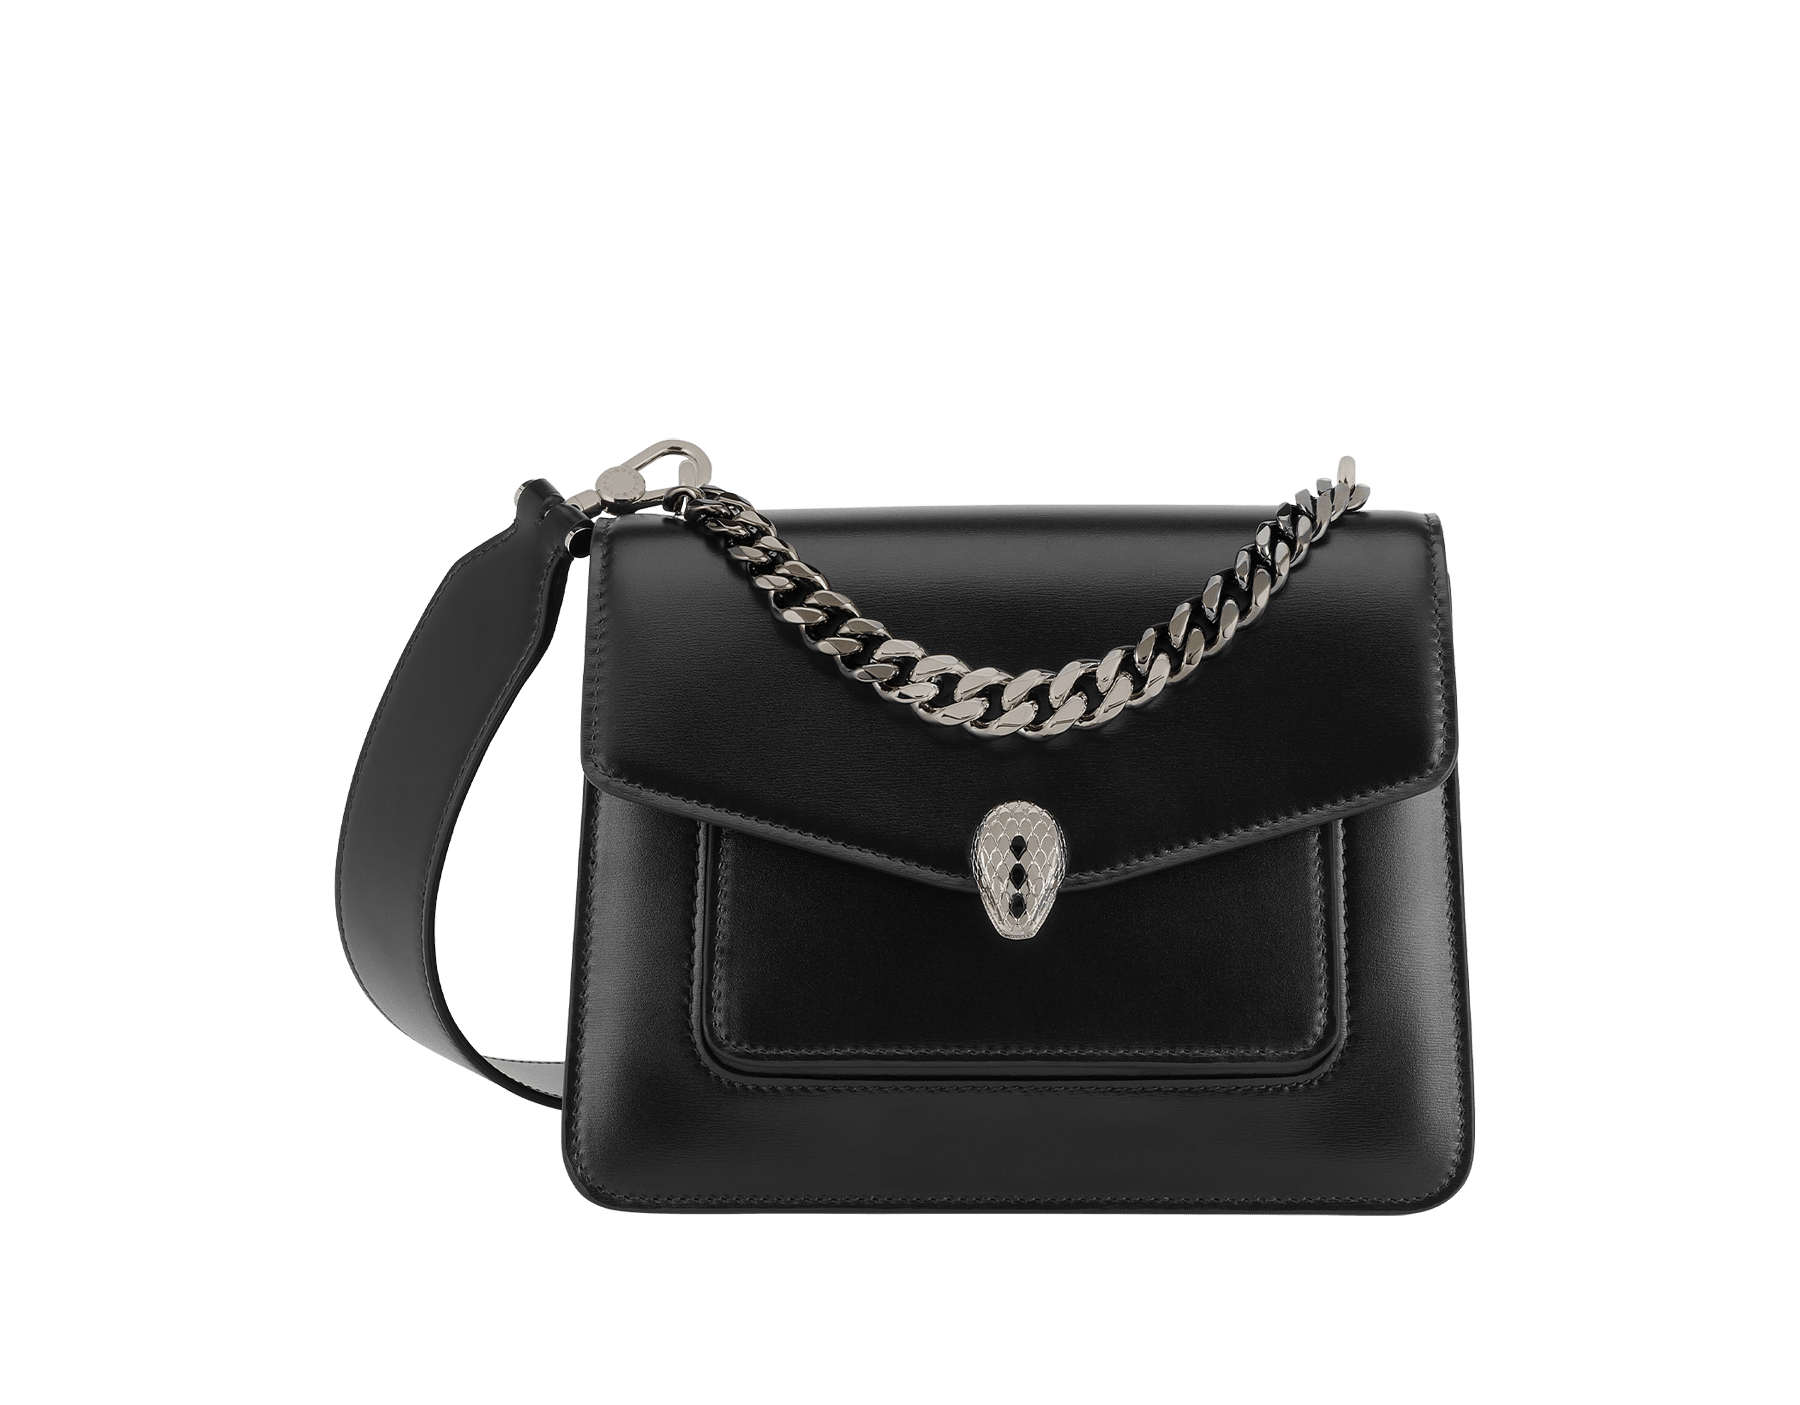 Serpenti Forever Maxi Chain small crossbody bag in black palmellato leather with black nappa leather lining. Captivating snakehead closure in palladium-plated brass embellished with black onyx scales and red enamel eyes. MCN-PL-B image 1